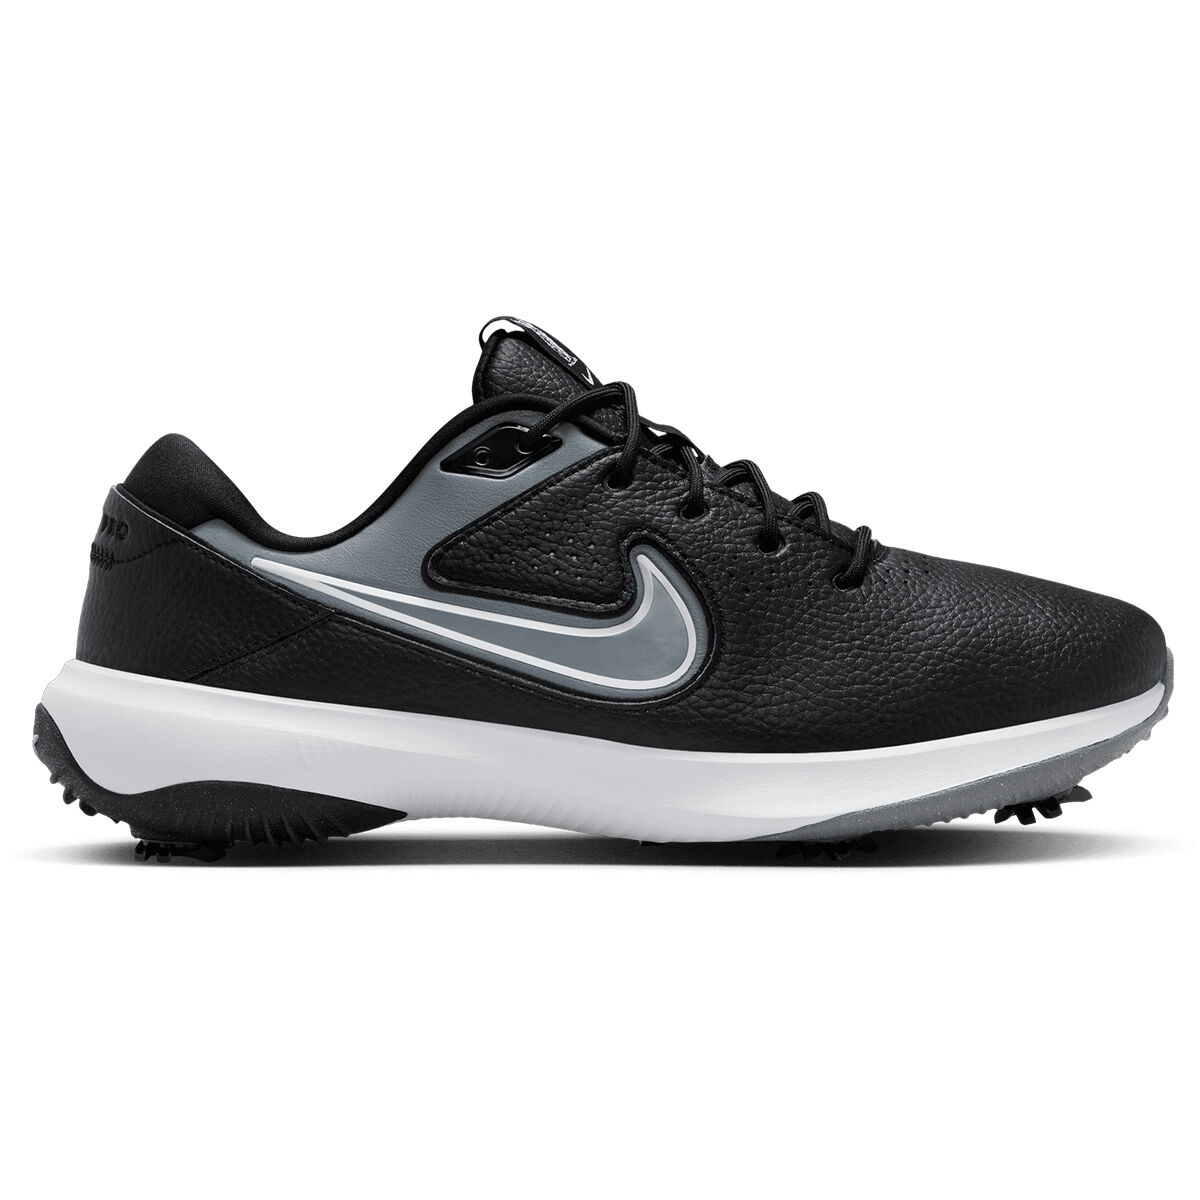 Nike Men’s Victory Pro 3 Waterproof Spiked Golf Shoes, Mens, Black/white/cool grey, 11 | American Golf